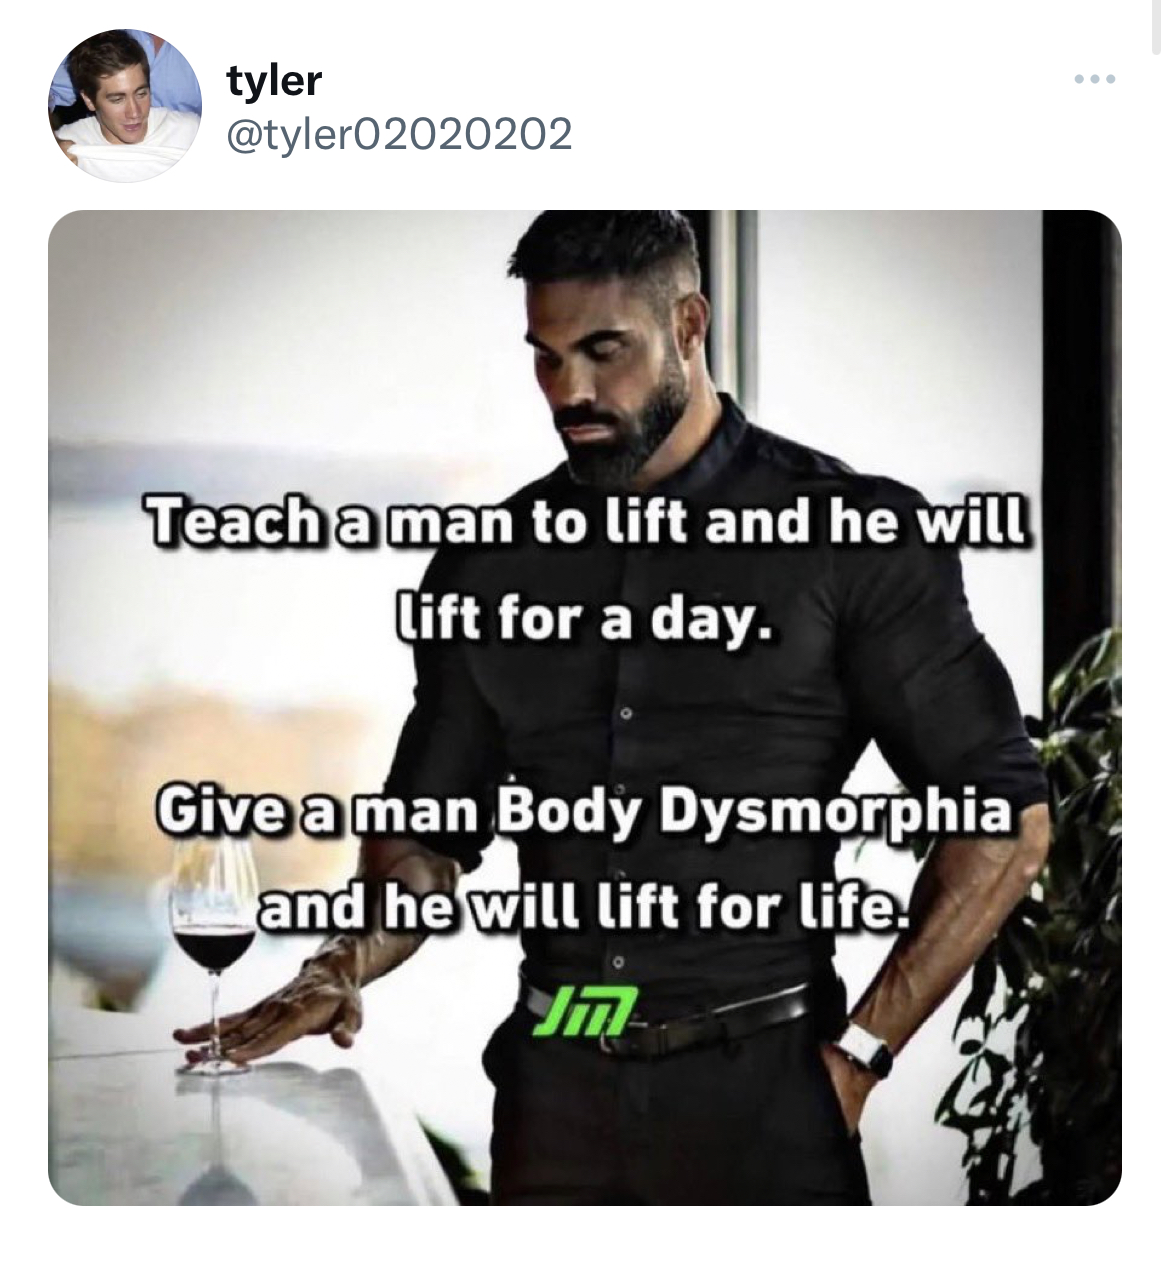 filthy and funny tweet - t shirt - tyler Teach a man to lift and he will lift for a day. Give a man Body Dysmorphia and he will lift for life!